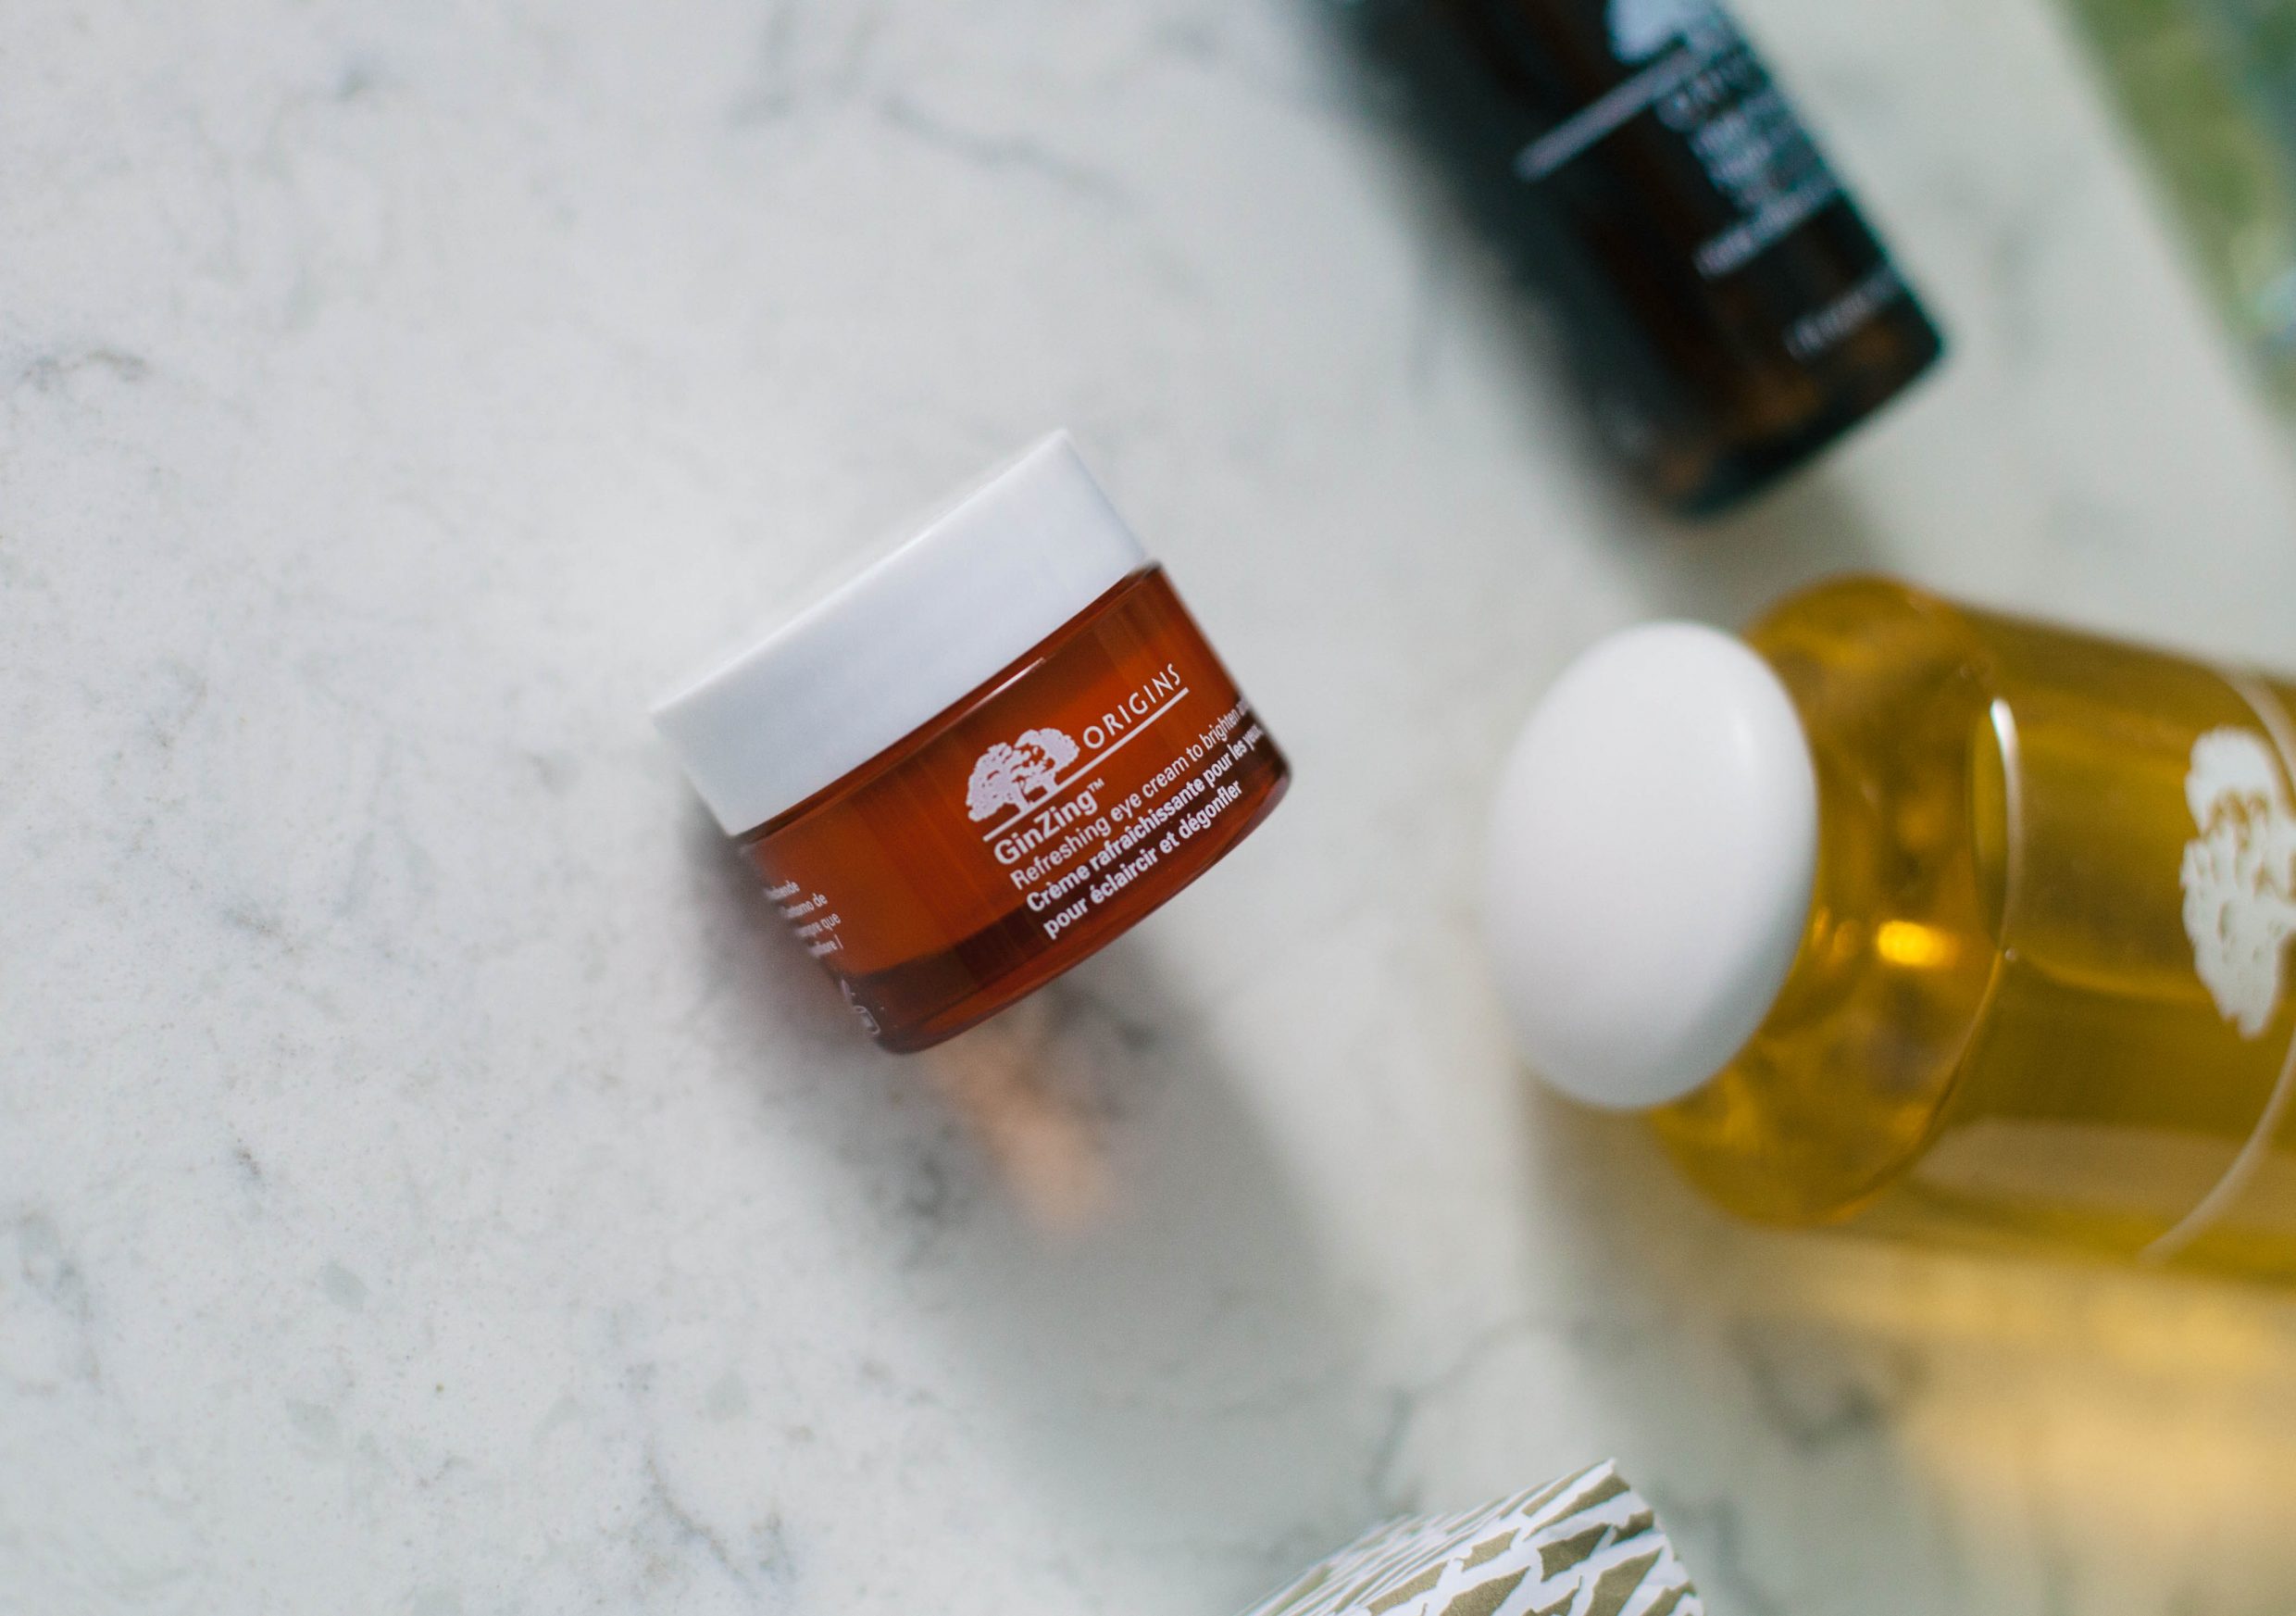 Origins skincare to stay moisturized and get glowing skin